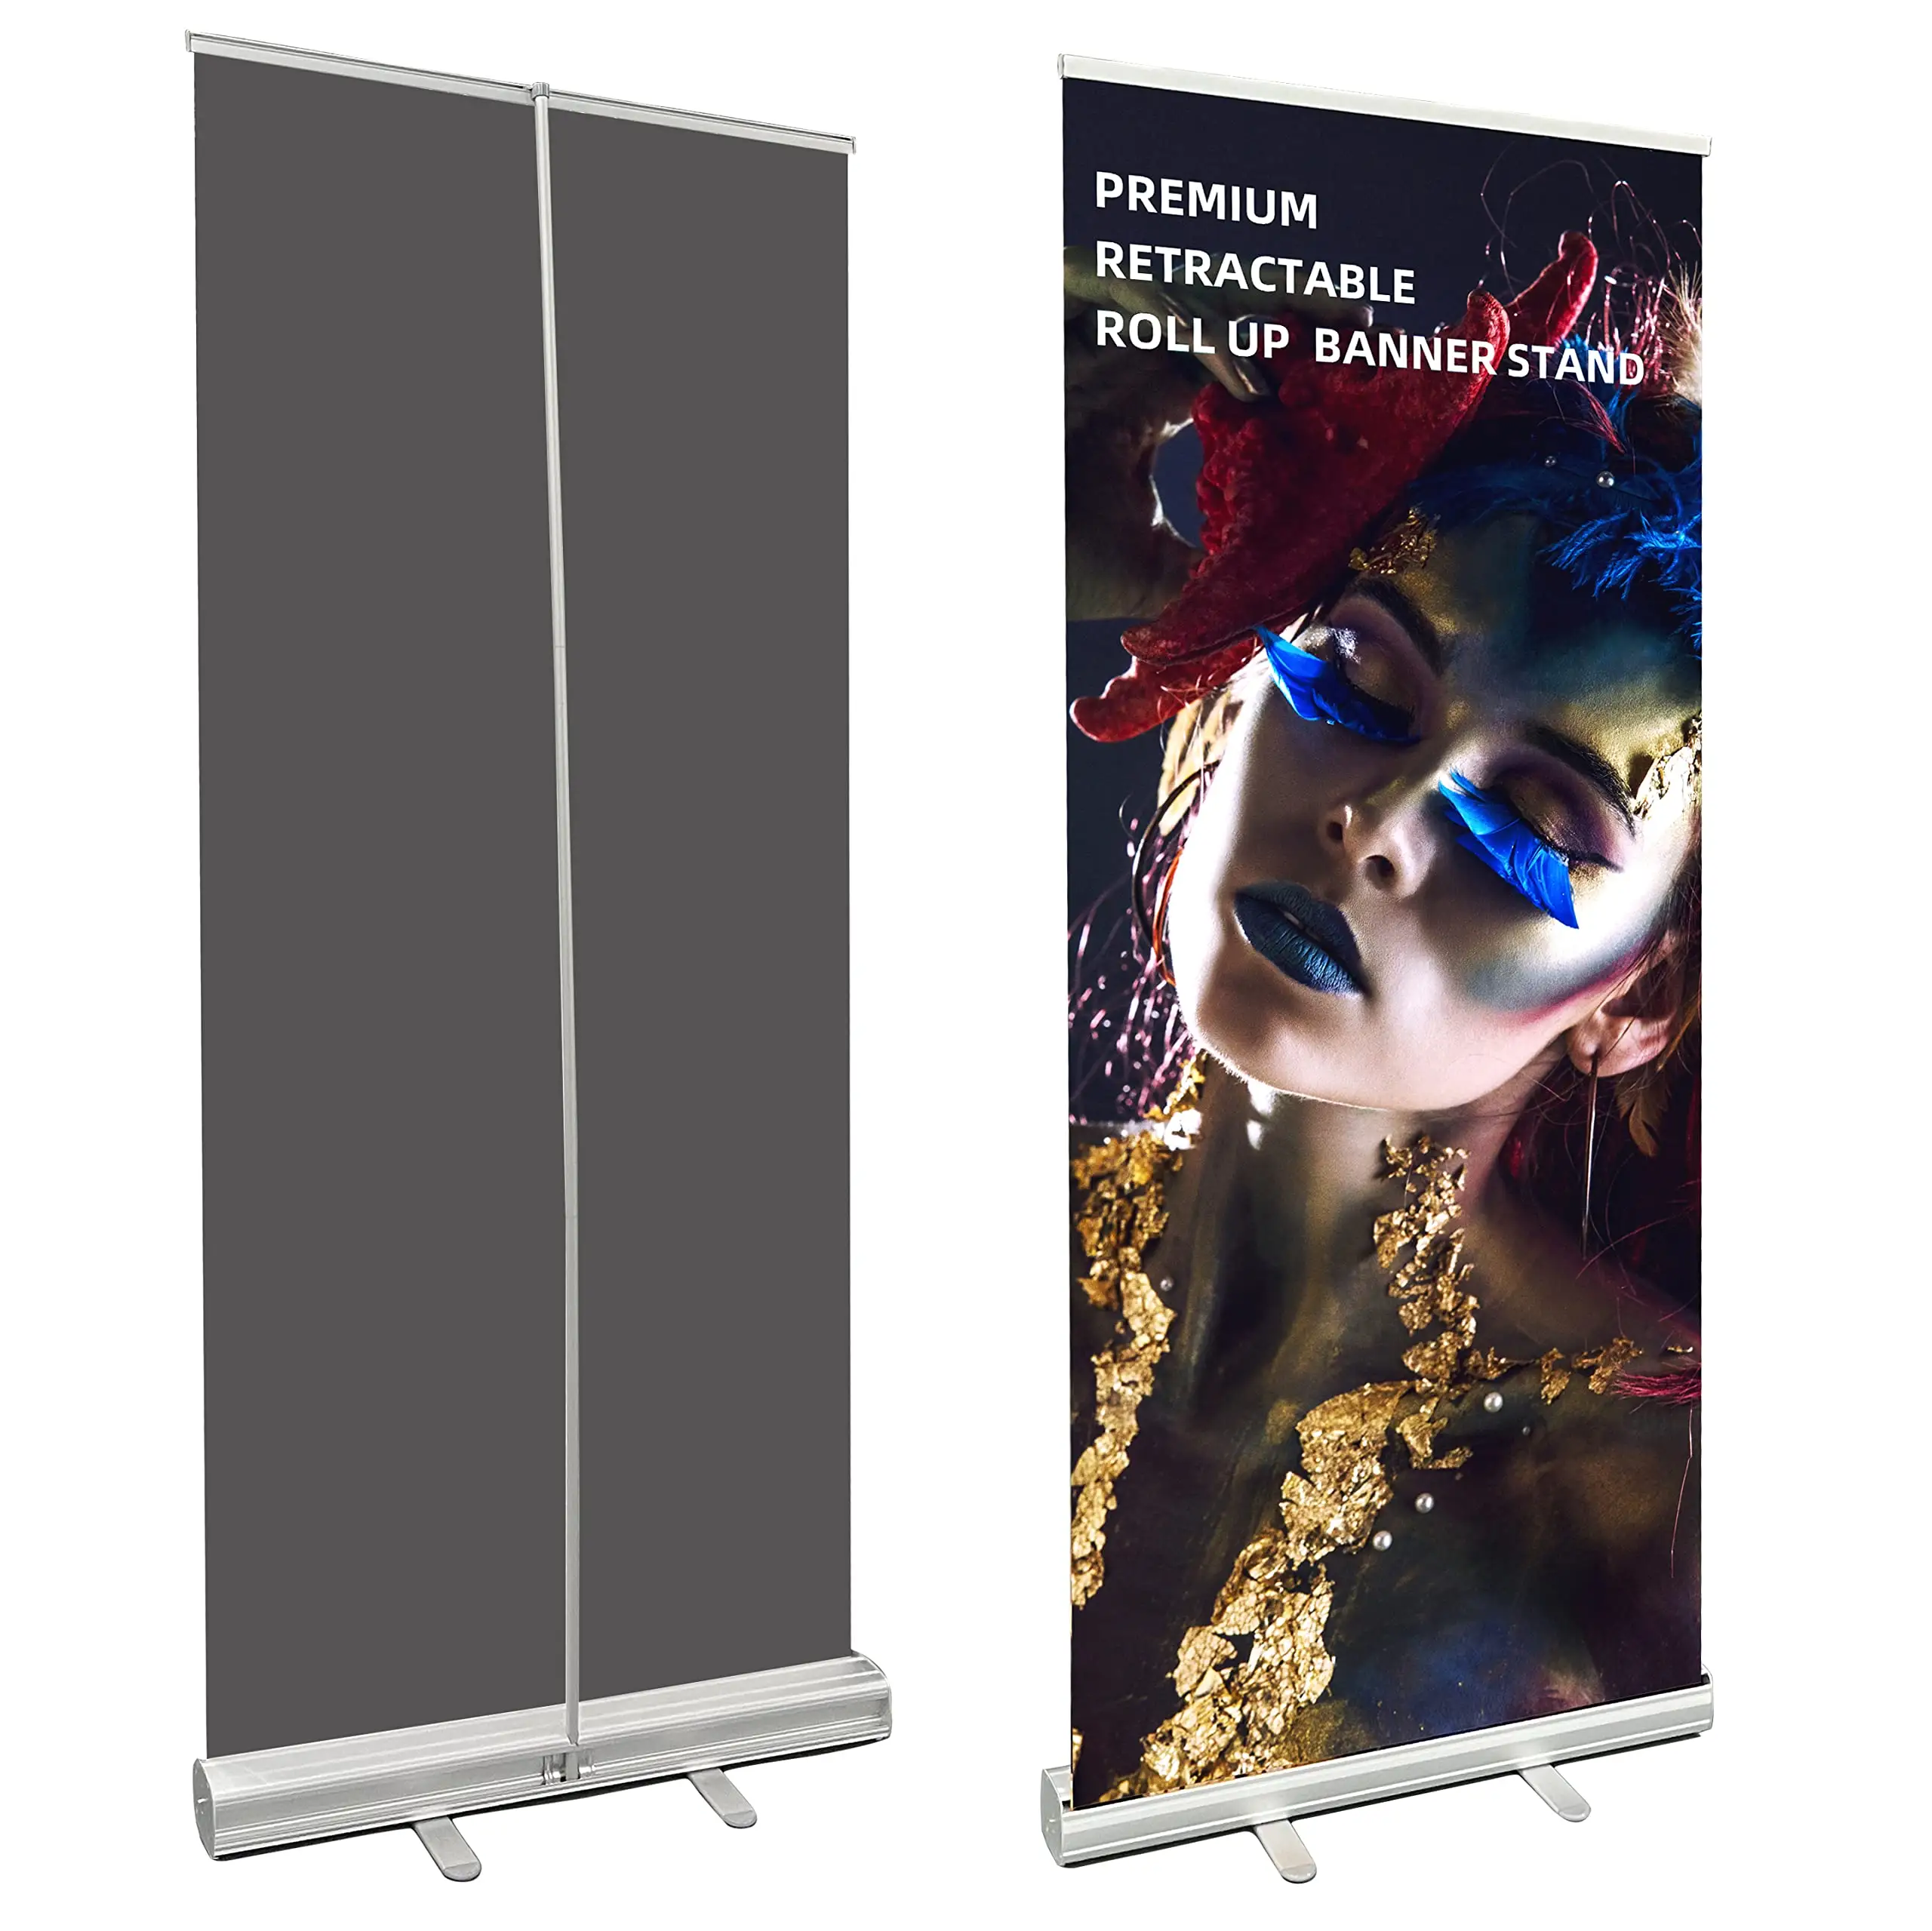 Standard Size 80*200cm Aluminium Stand Roll Up Banner Advertising Economic Roll Up Stand Banner